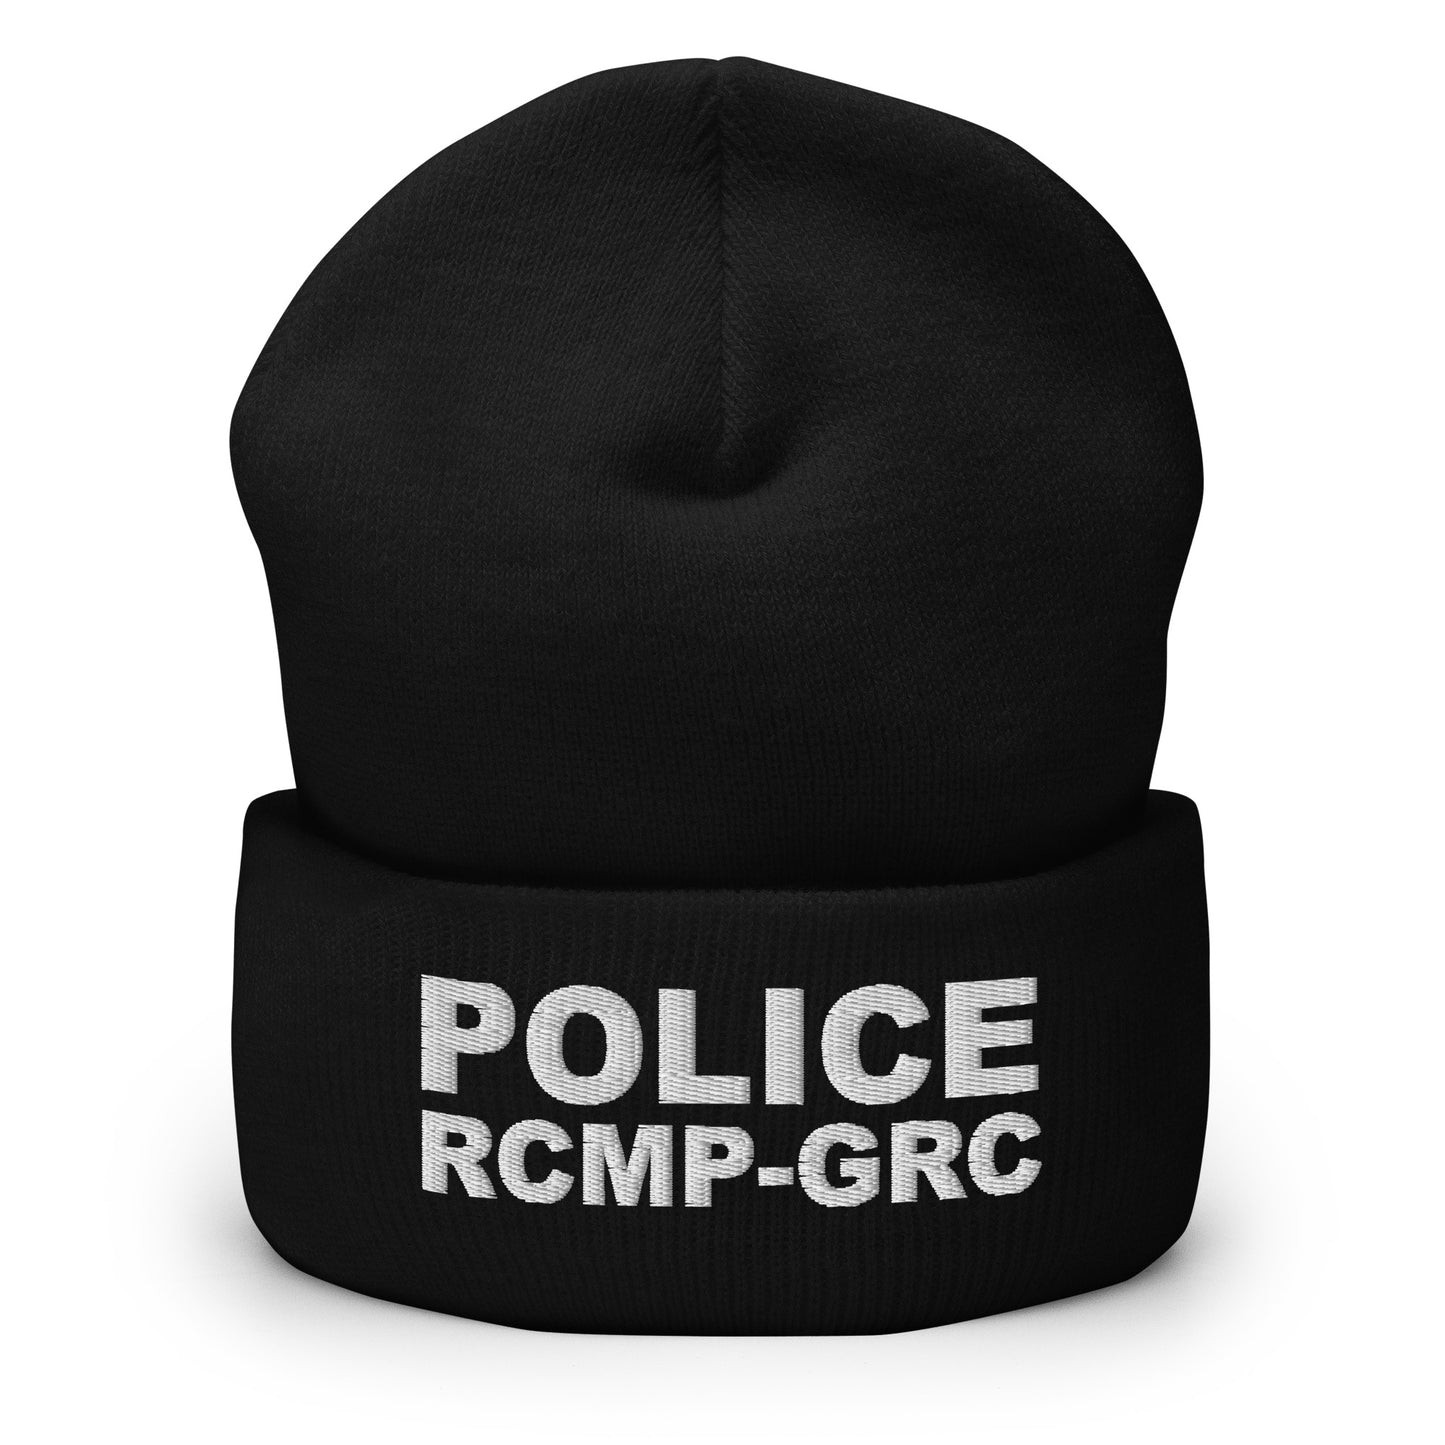 Royal Canadian Mounted Police (RCMP-GRC) Duty Toque